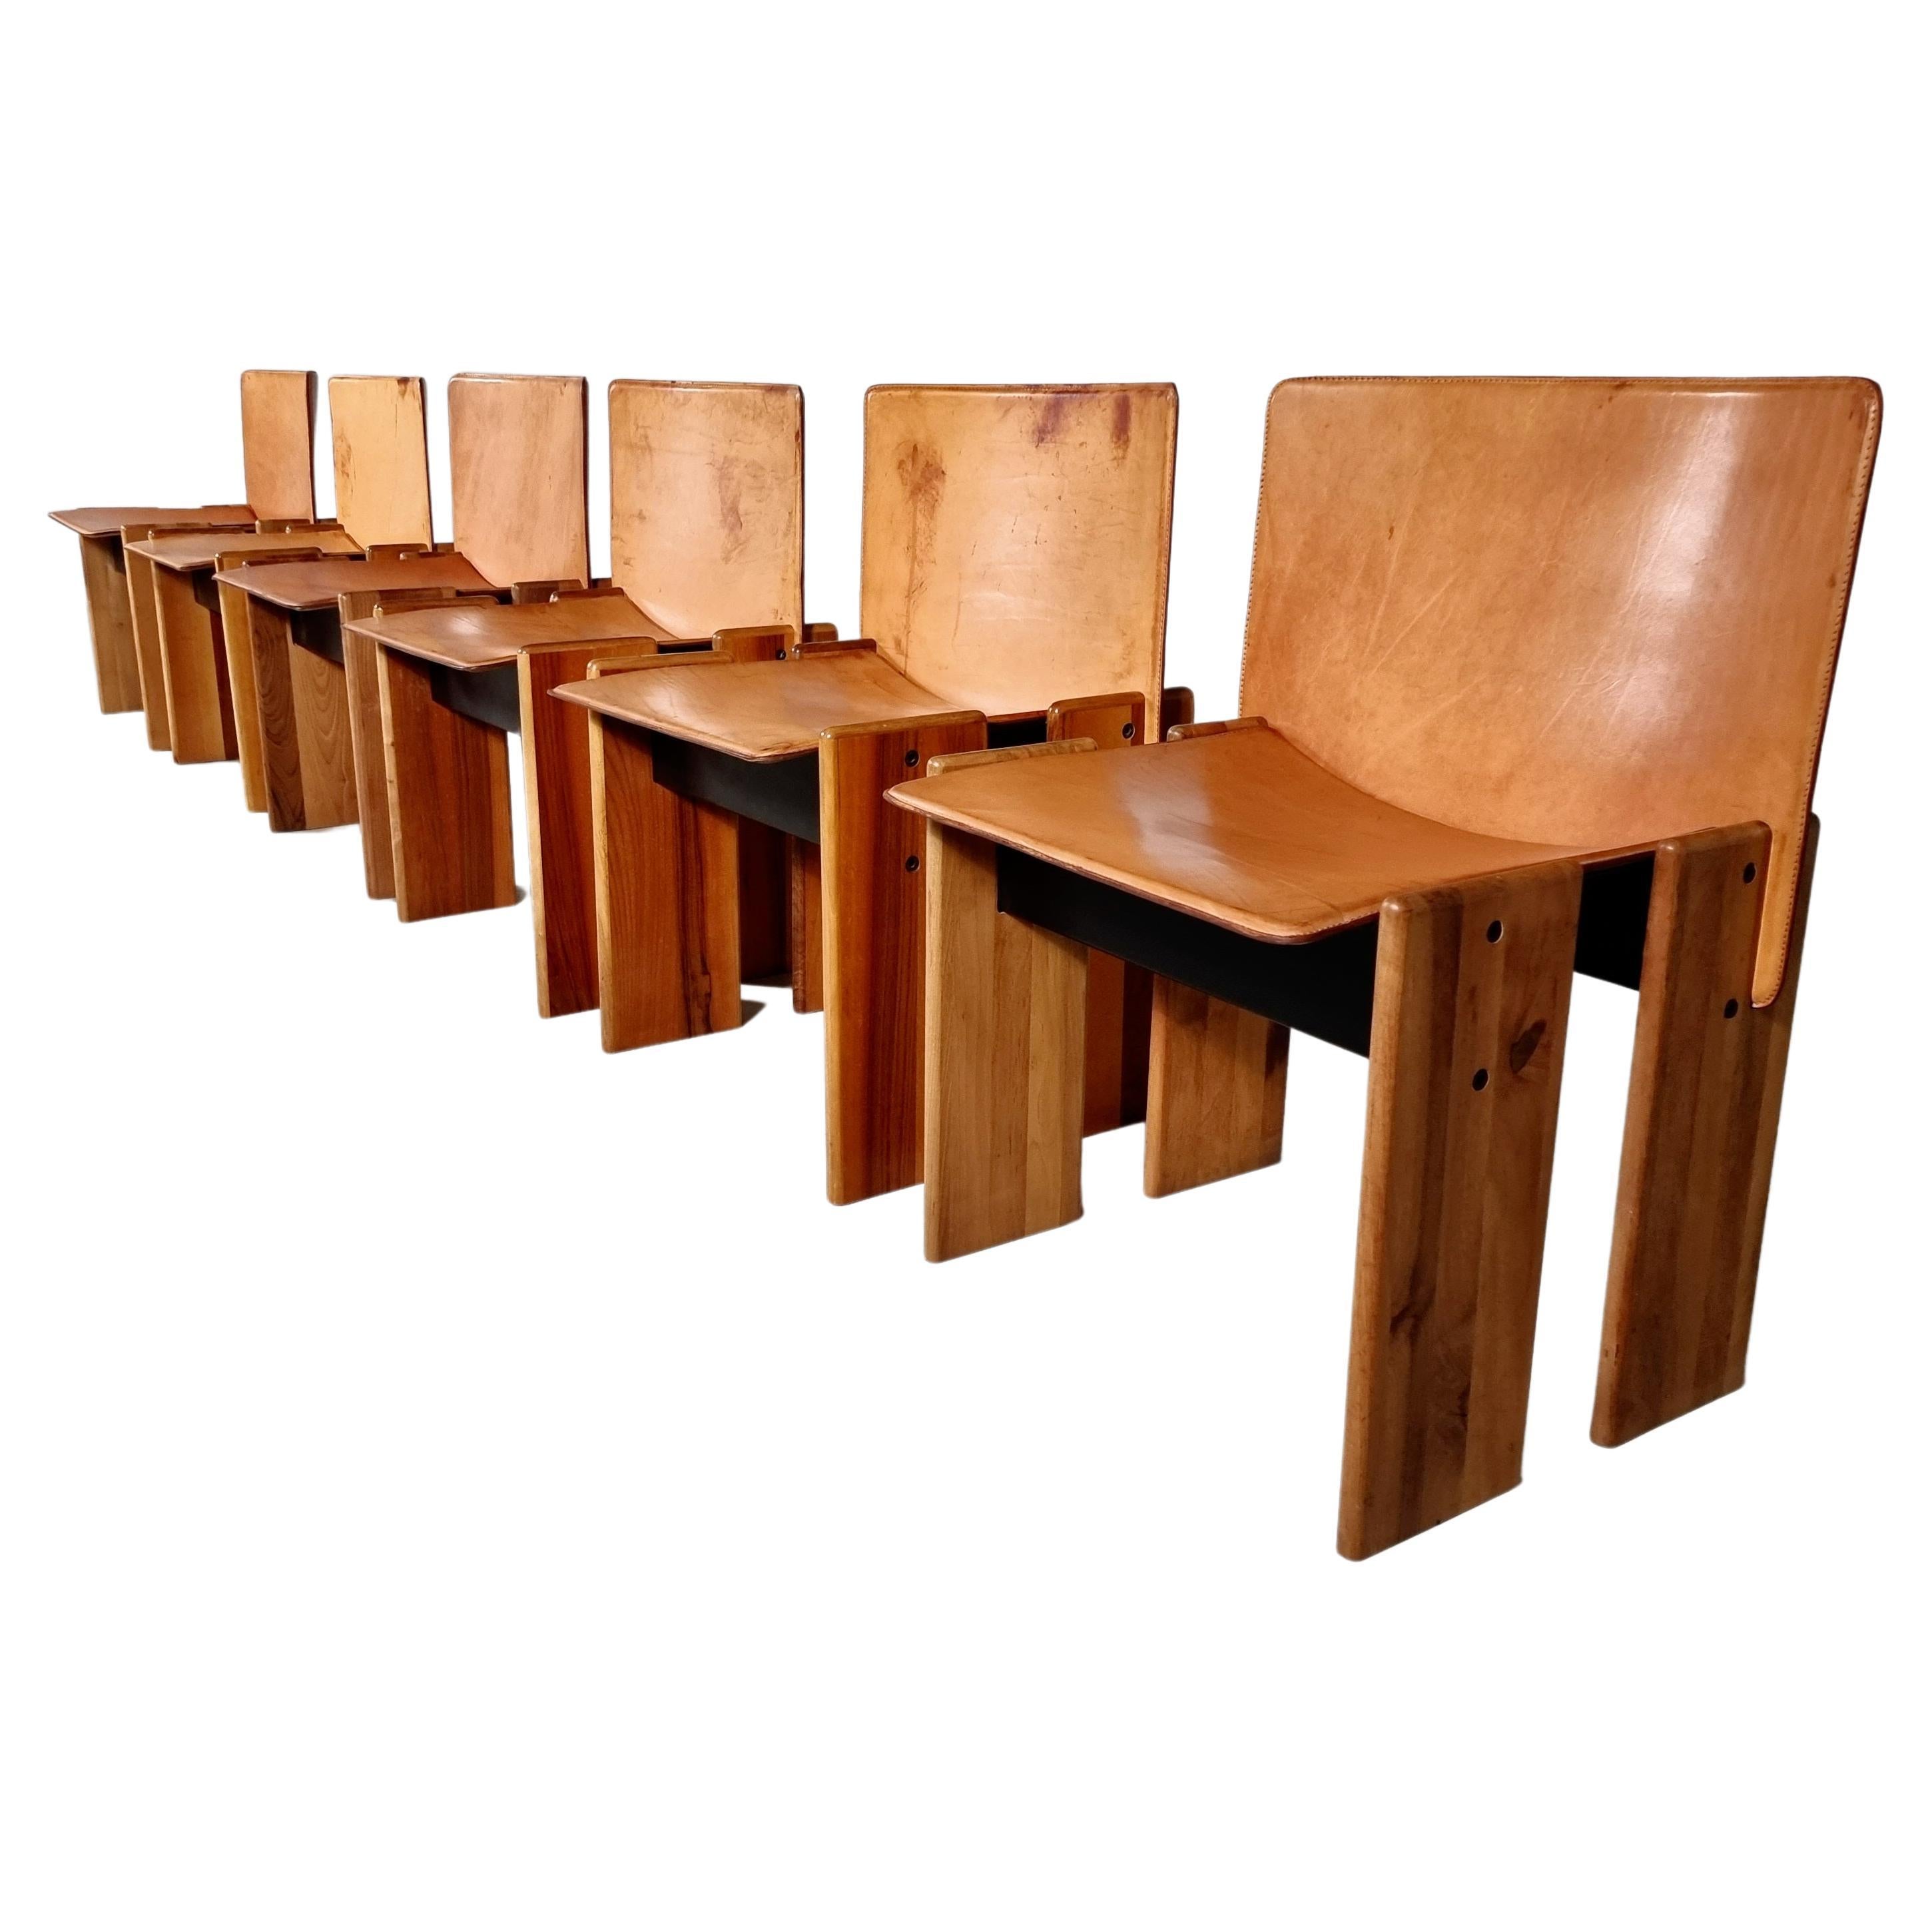 Set of 6 dining chairs by Sapporo for Mobil Girgi, 1970s